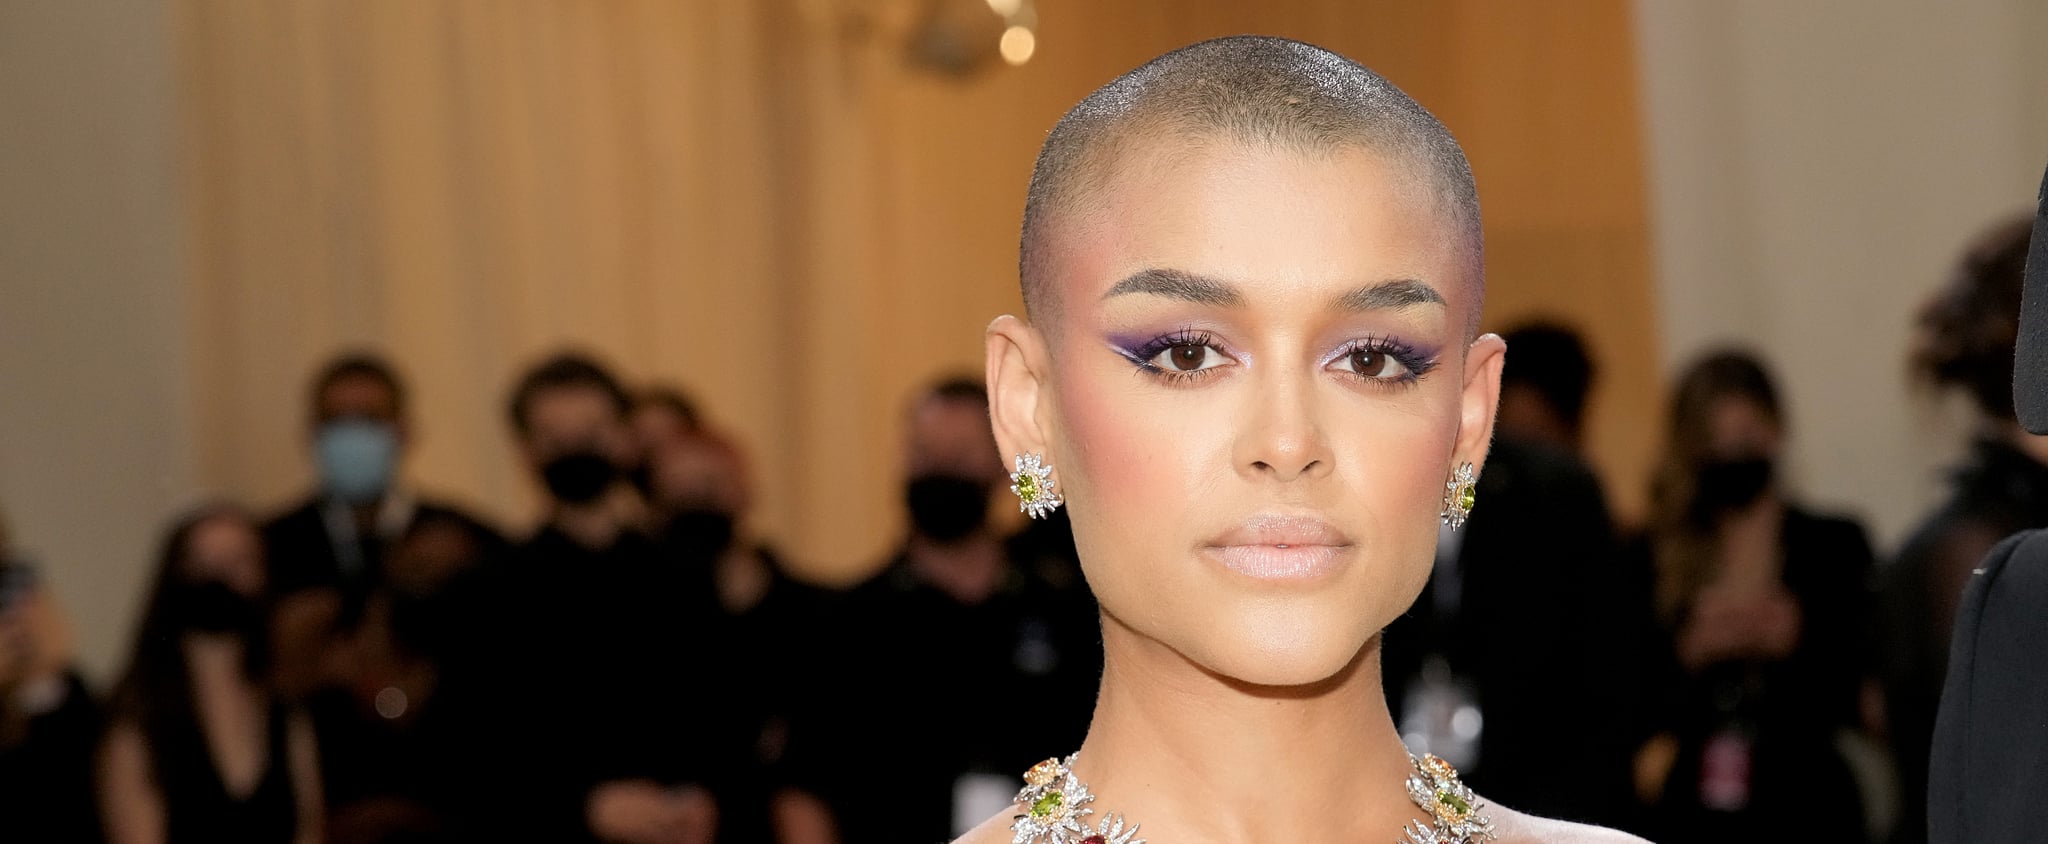 Buzz Cut 101: How to Style, What to Know, and Photos | POPSUGAR Beauty